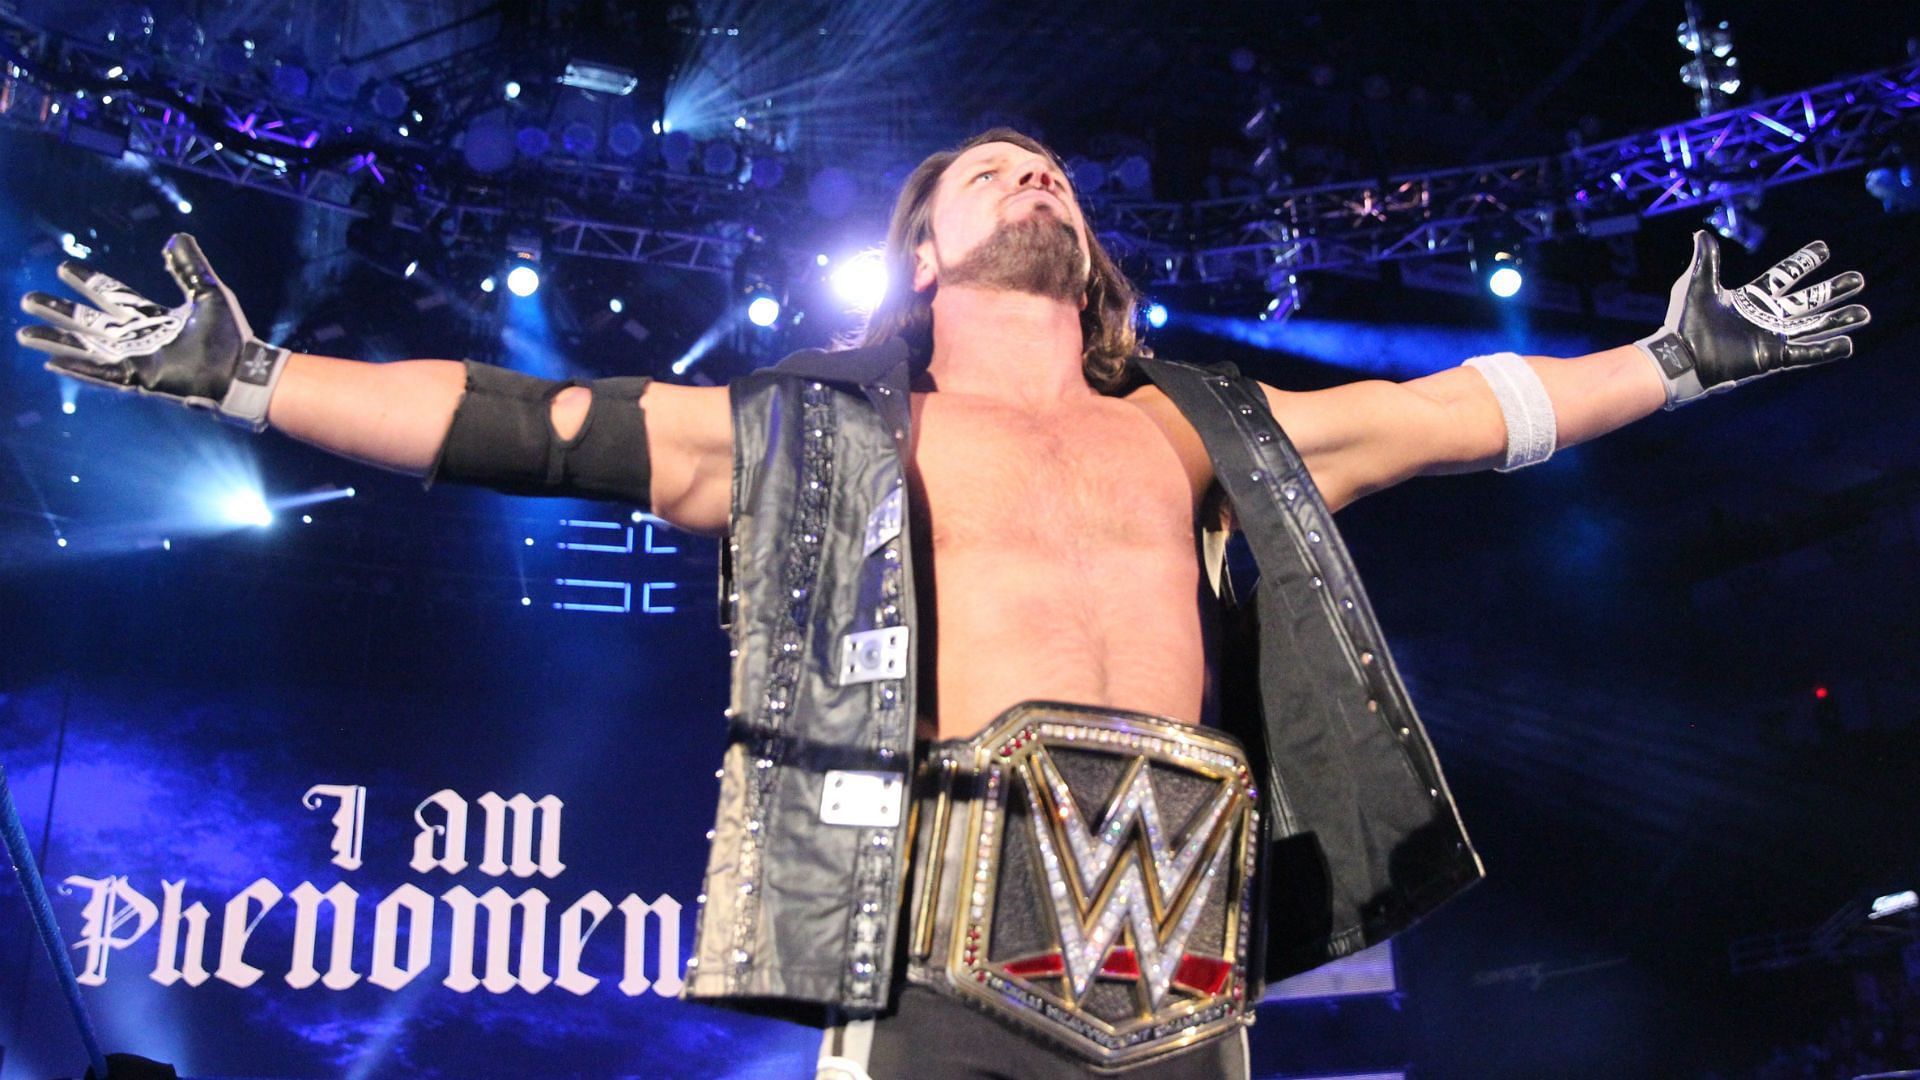 AJ Styles would be a Phenomenal replacement as a member of The Shield.